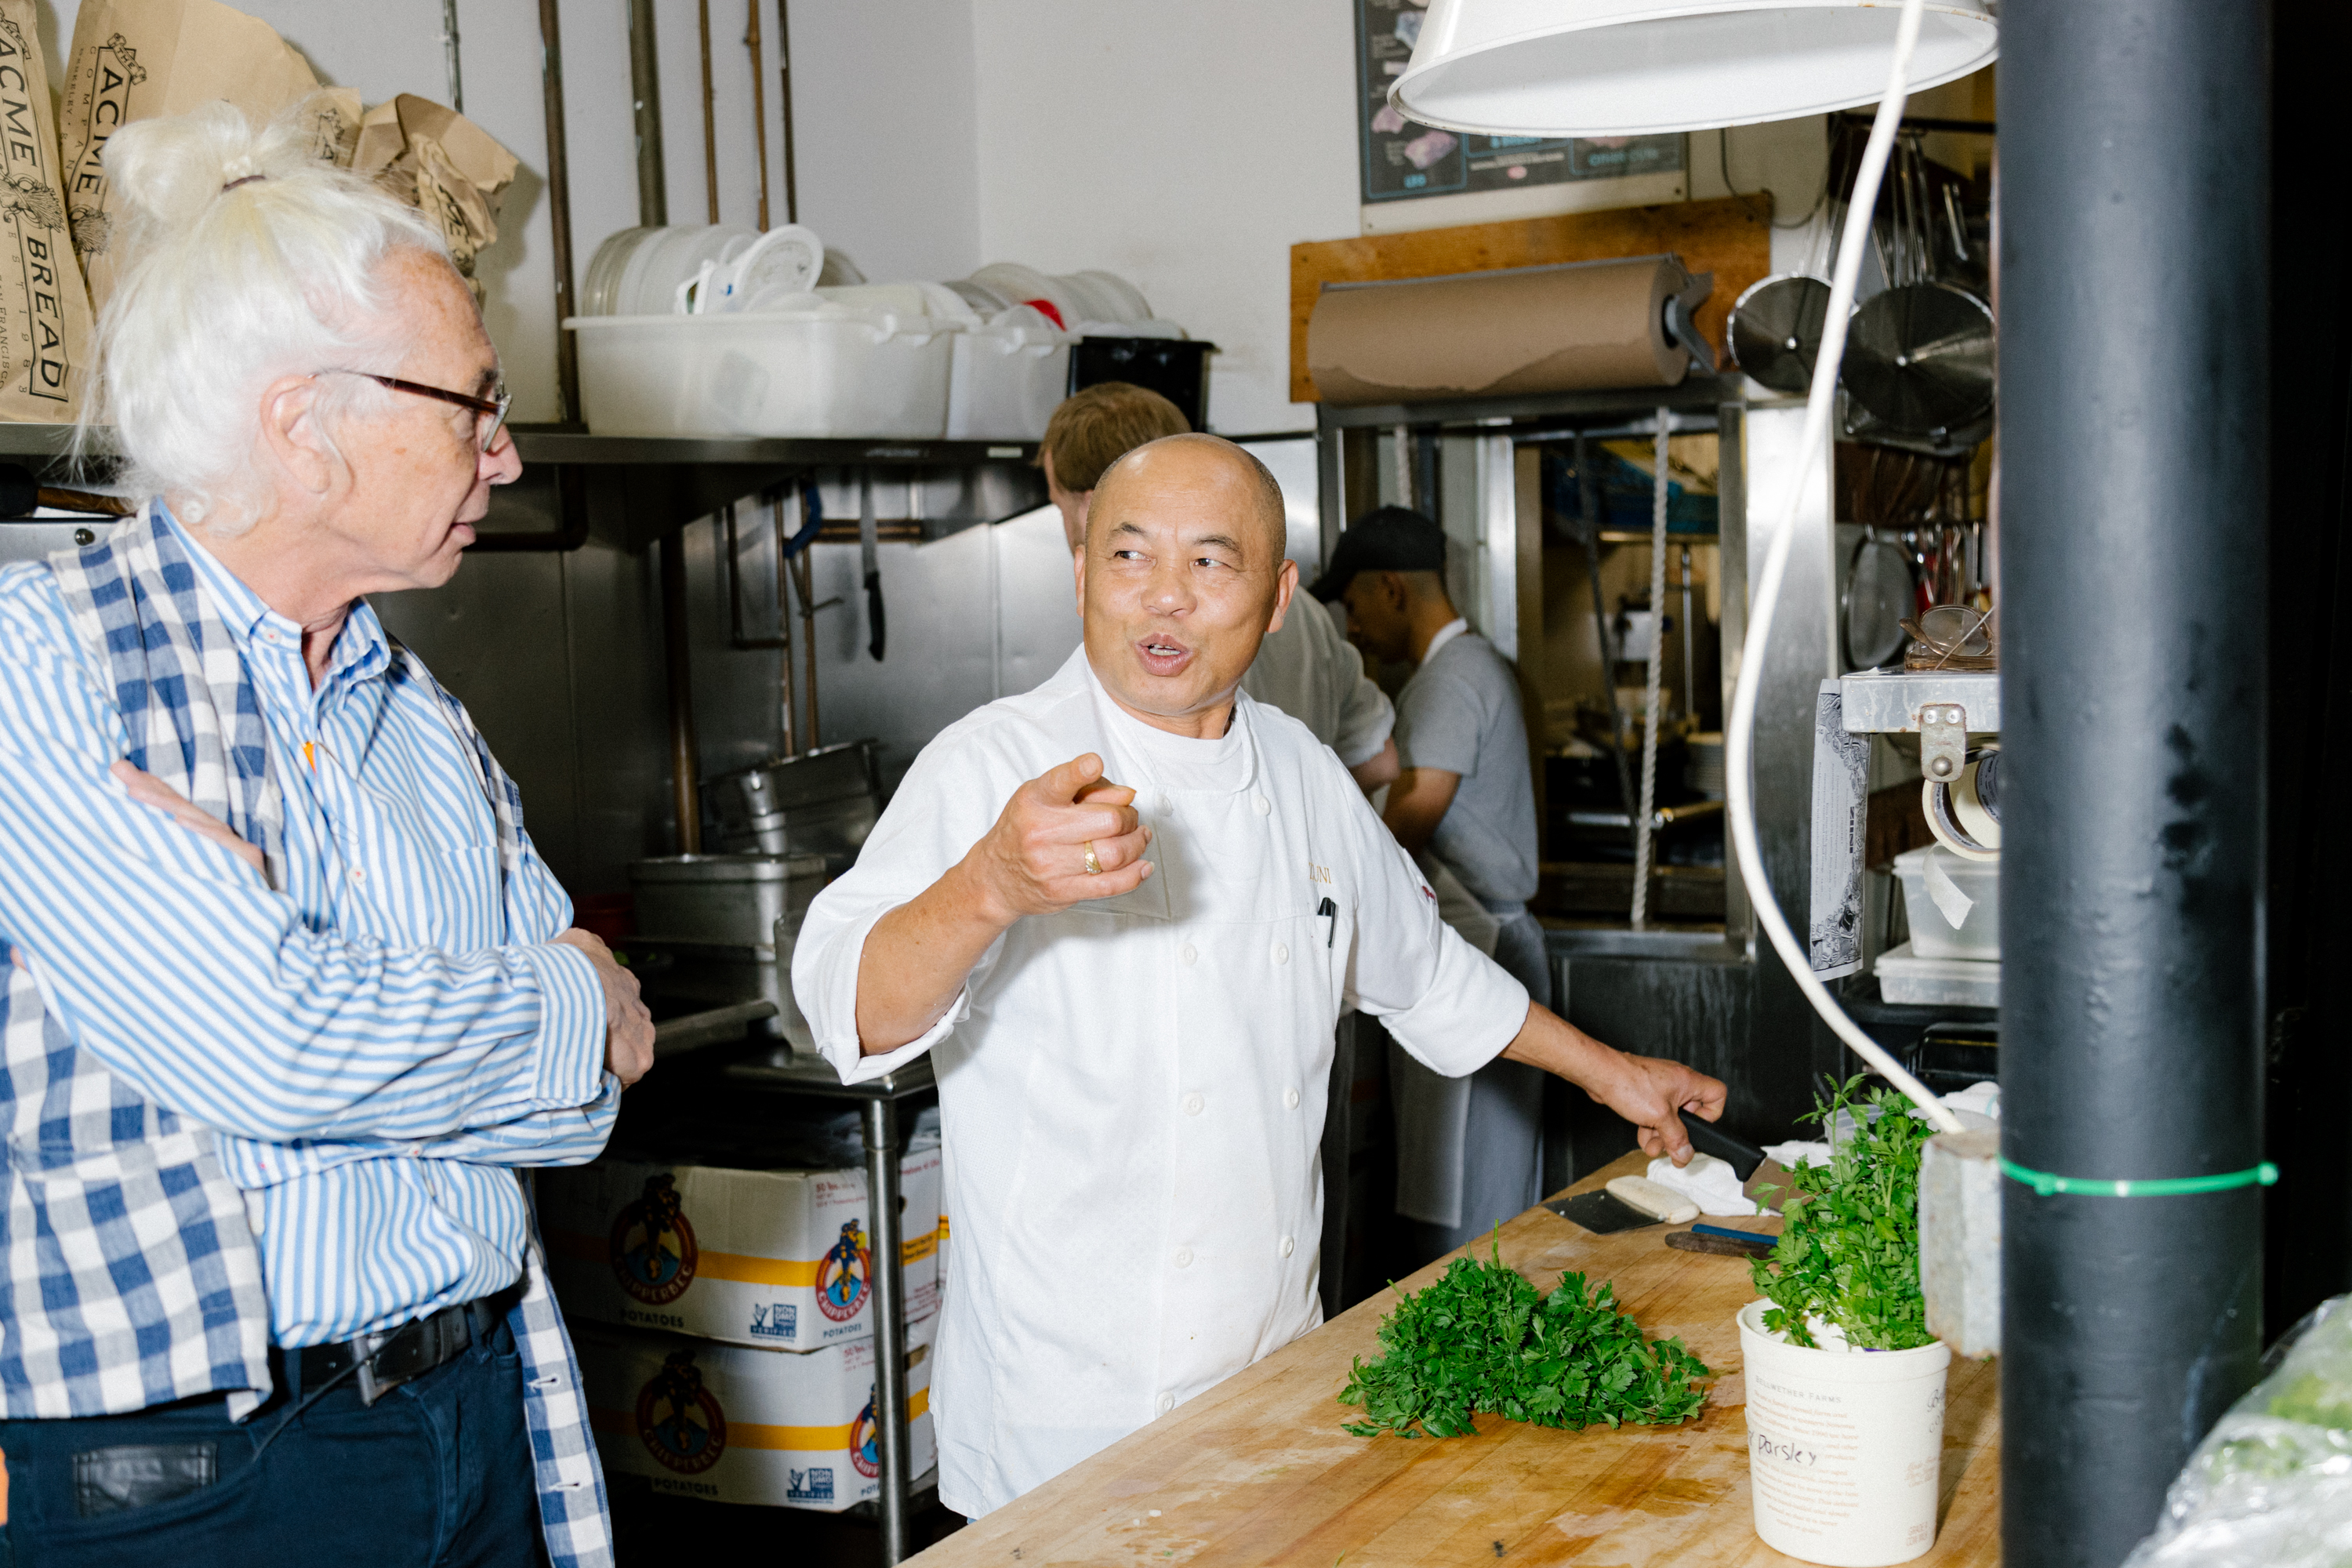 A chef speaks to a person in a kitchen area with parsely on the cutting table.